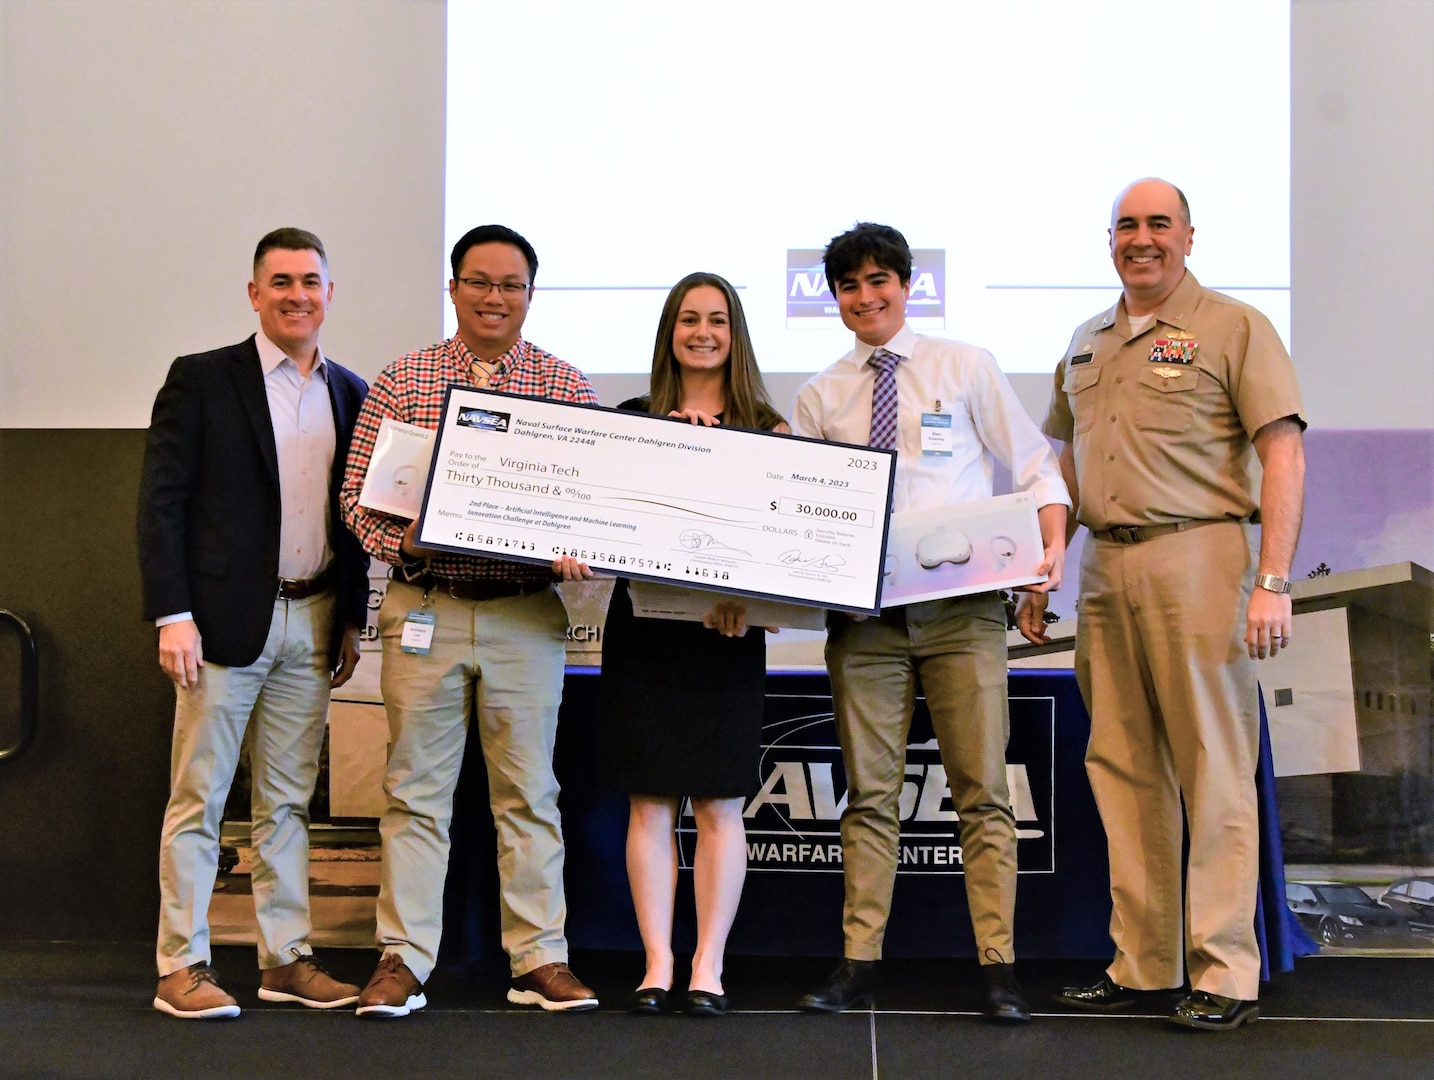 IMAGE: Virginia Tech took home the second place prize of $30,000 on the final day of the Artificial Intelligence and Machine Learning Innovation Challenge at Dahlgren. Pictured from left to right: NSWCDD Technical Director, Dale Sisson, SES, along with Virginia Tech’s team of Anthony Lee, Danielle Reale, Alex Downey and NSWCDD Commanding Officer, Capt. Philip Mlynarski.